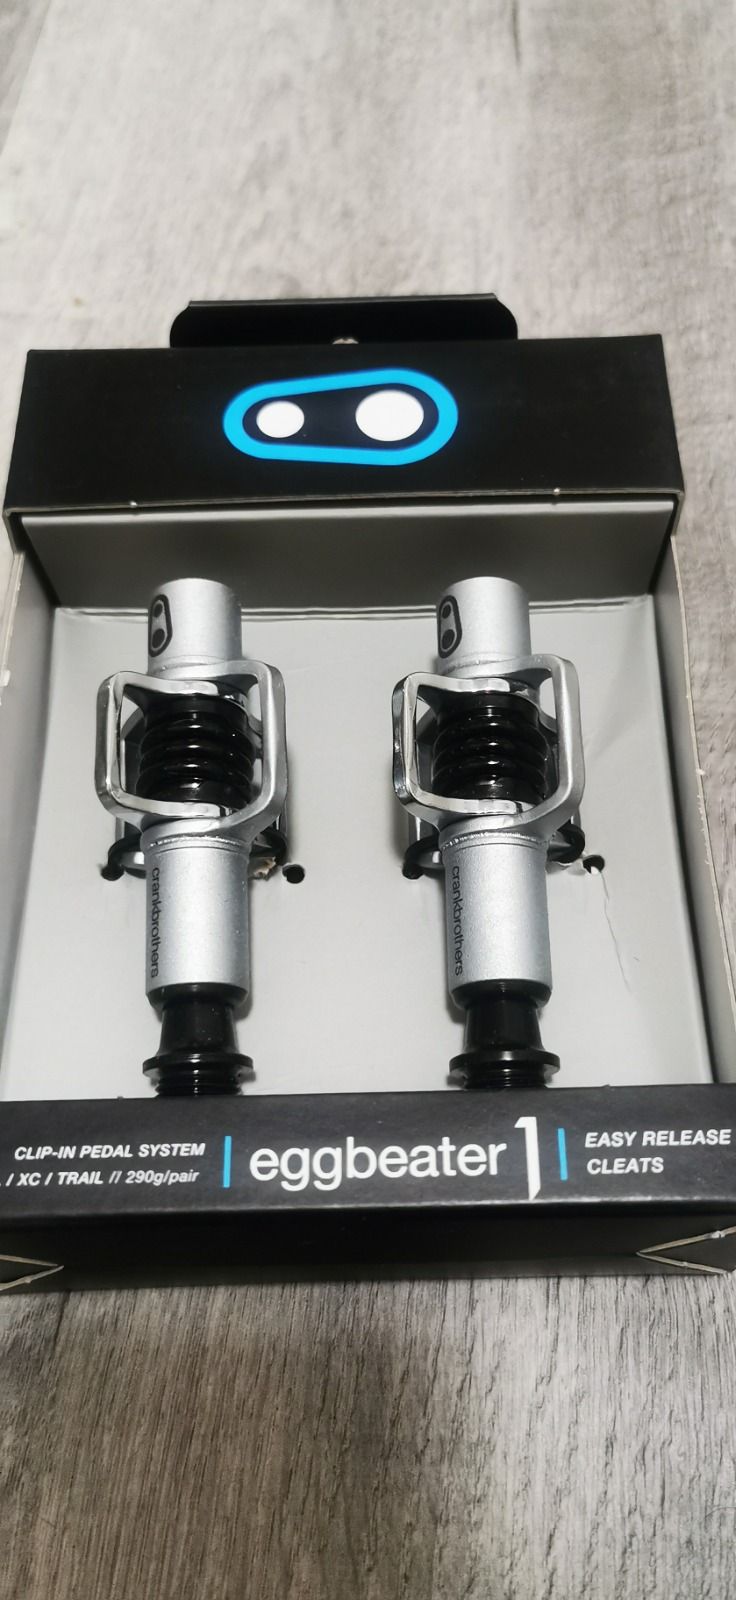 CrankBrothers Eggbeater 1